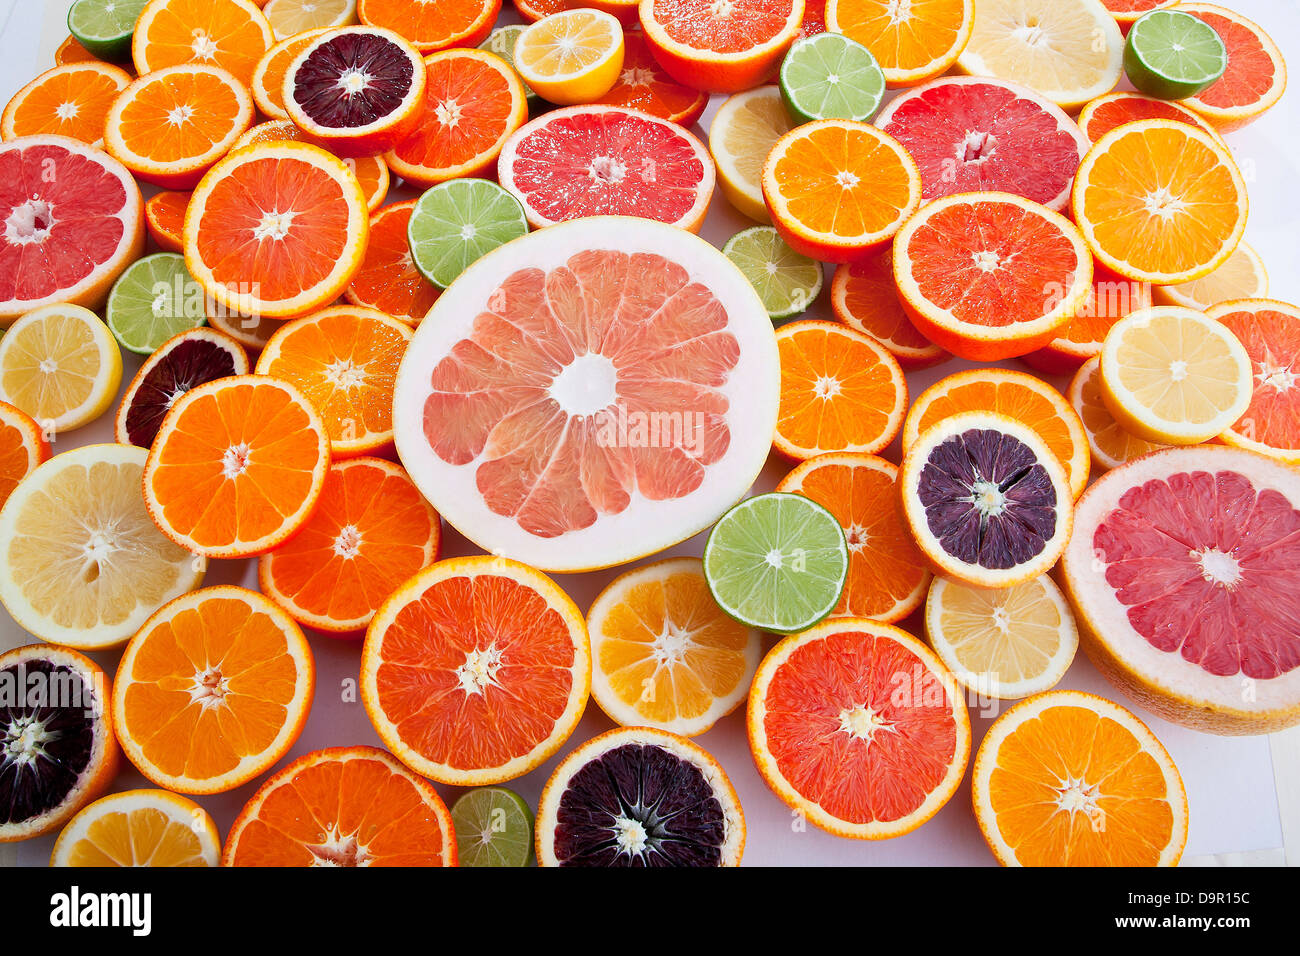 Lemons Limes Oranges Grapefruit High Resolution Stock Photography And Images Alamy